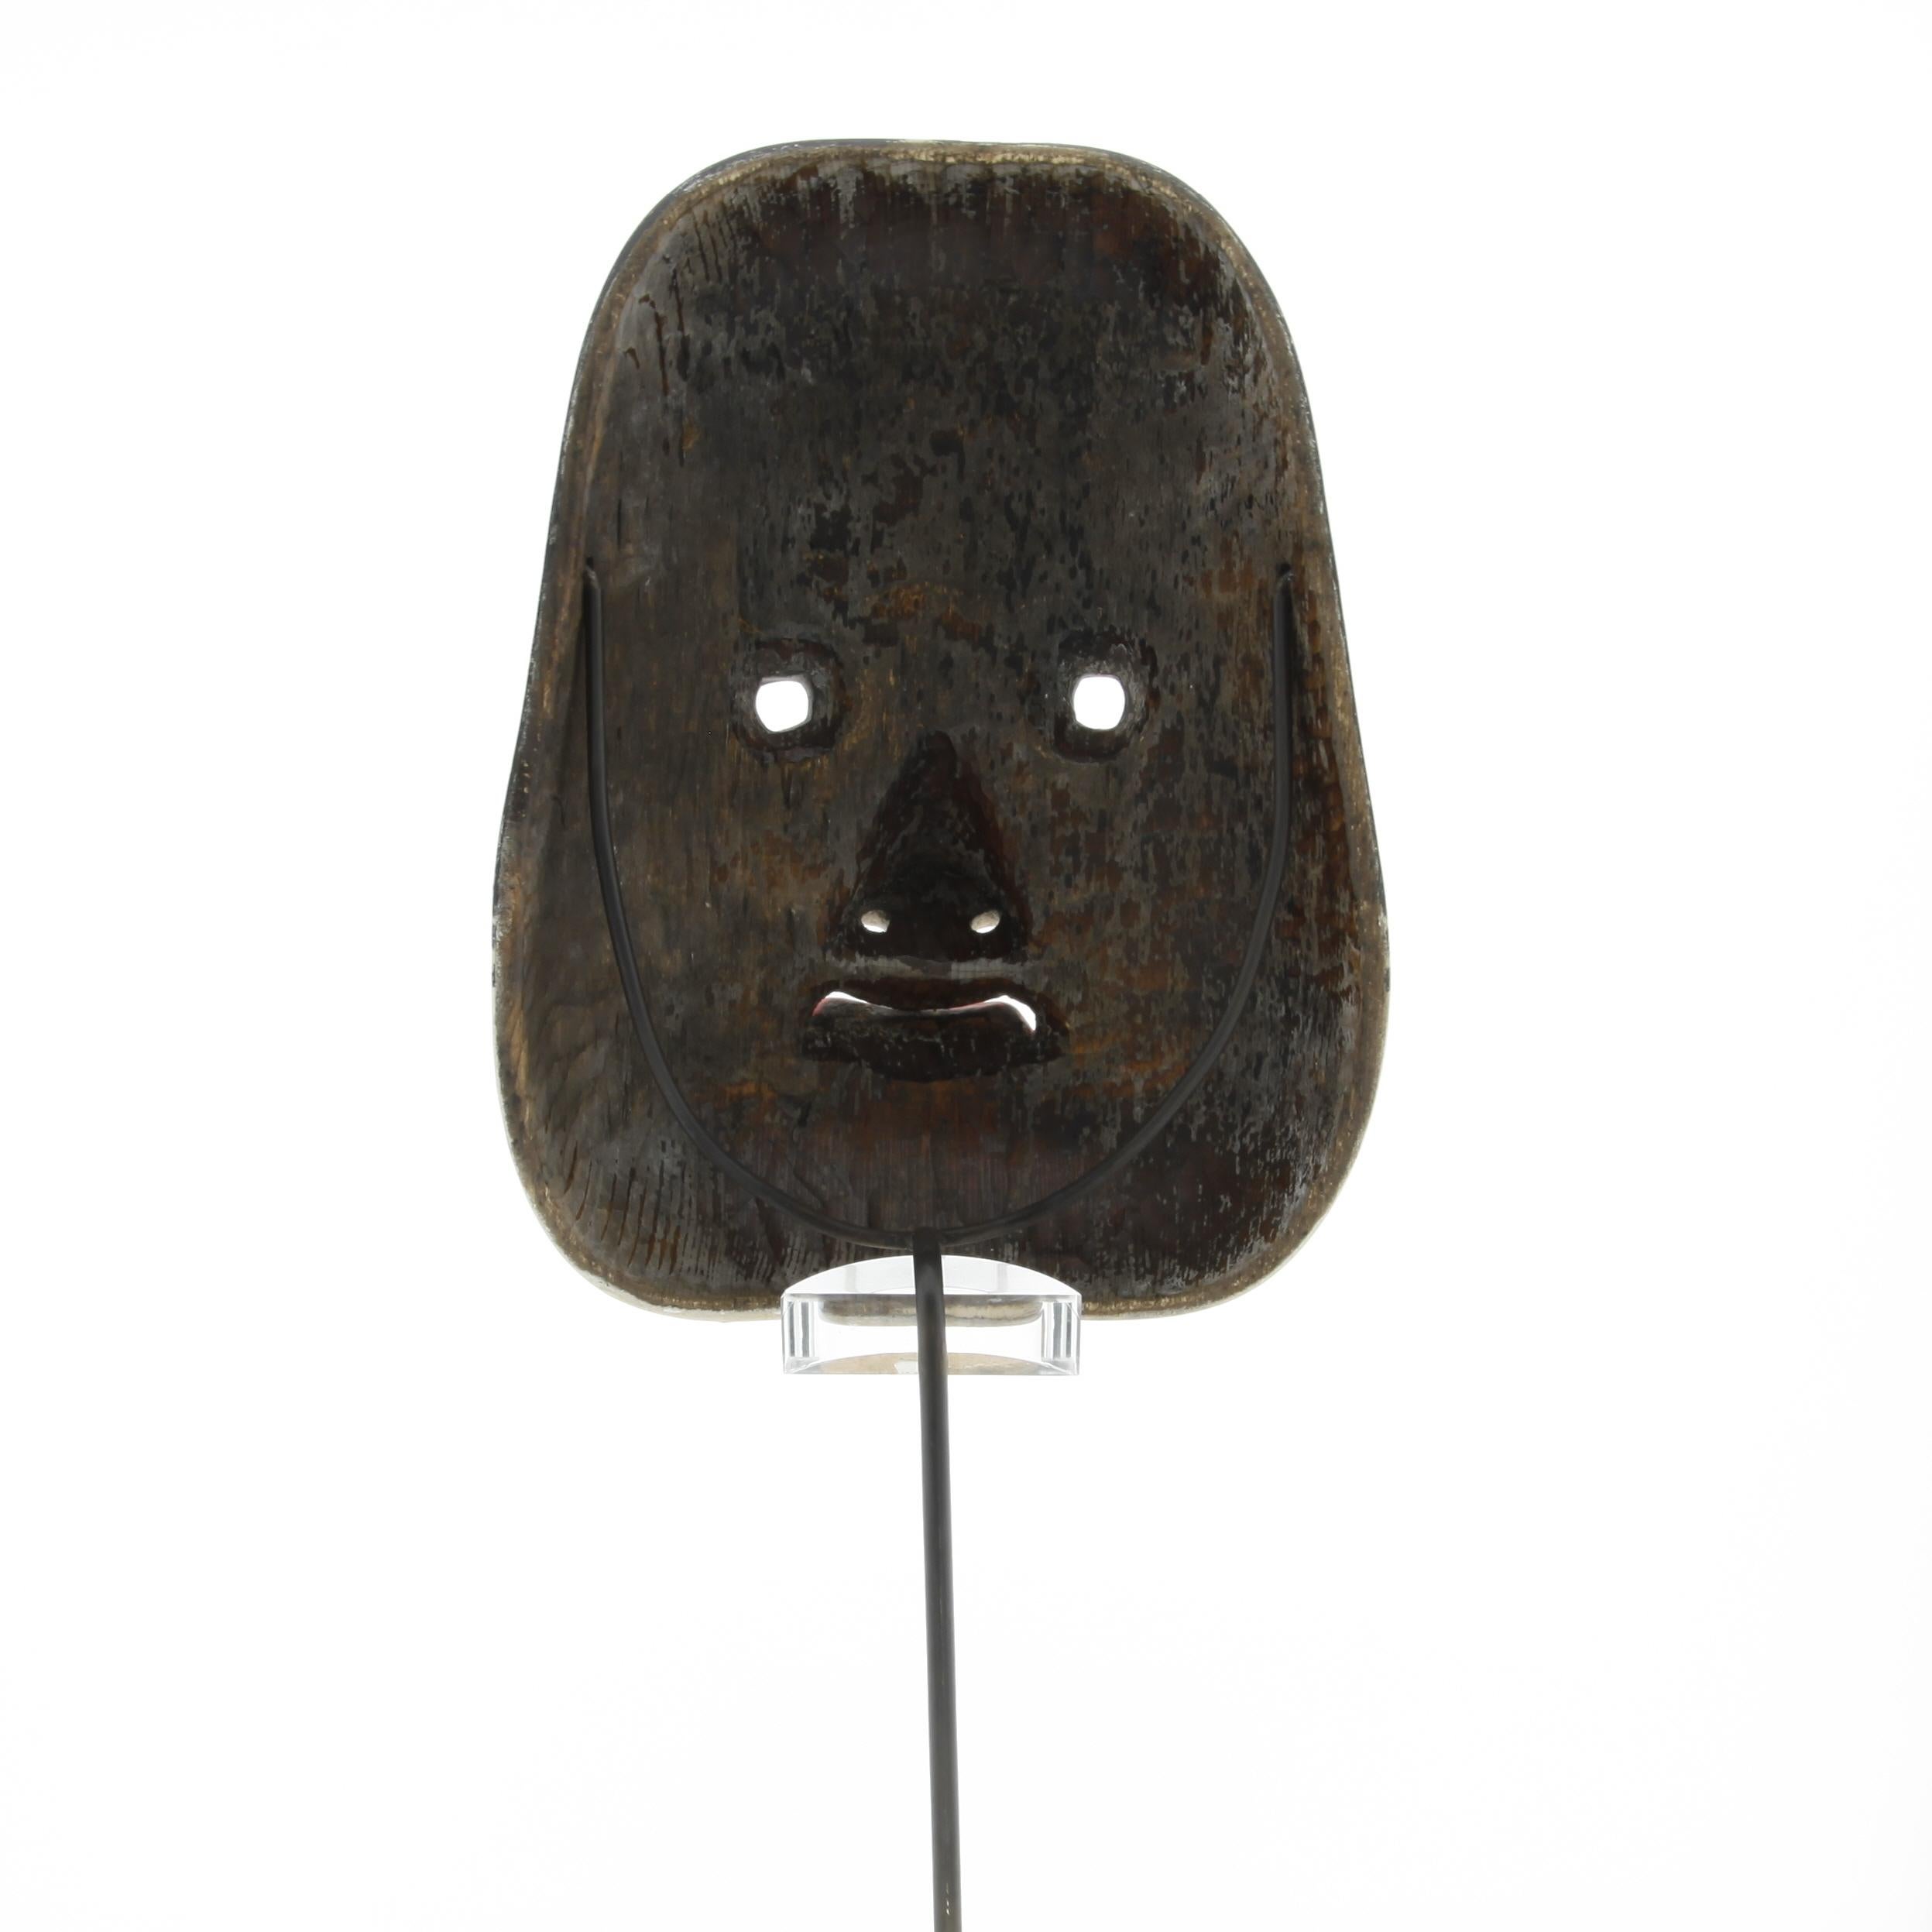 Arts and Crafts Kyogen Mask, Oto, Japanese Classical Theatre, 20th Century, Woodcraft, Handmade For Sale